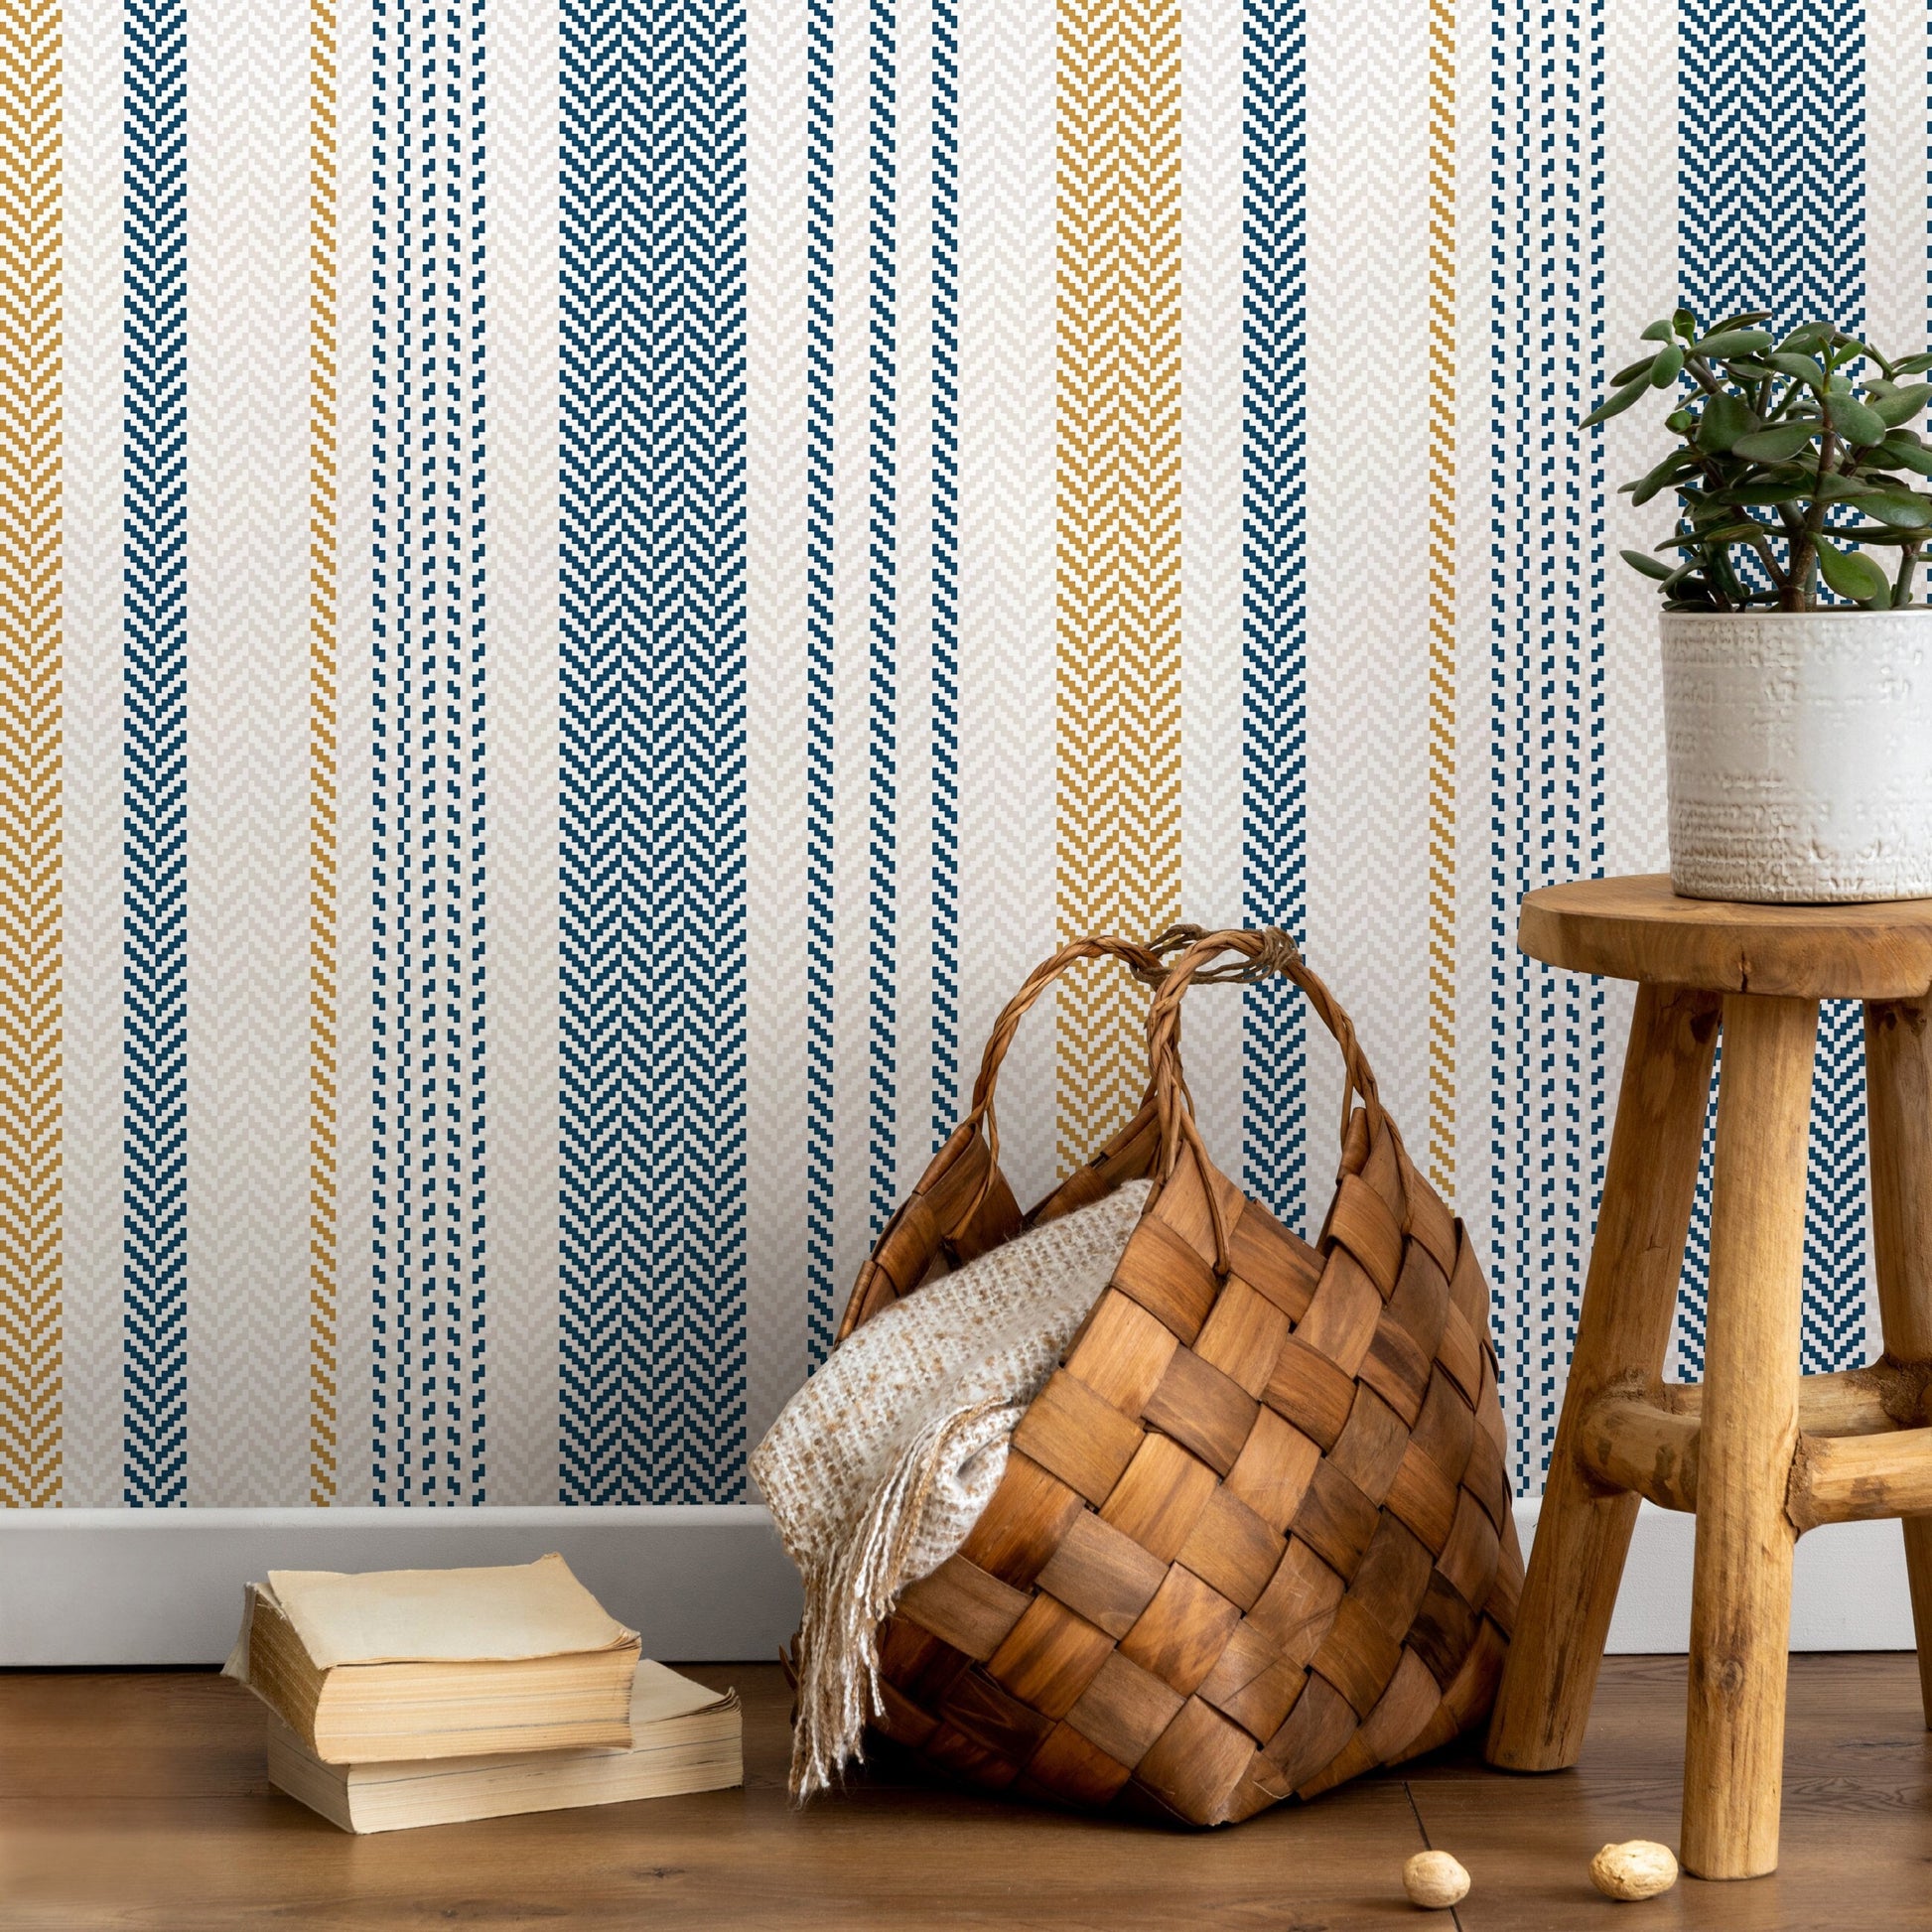 Farmhouse Striped Wallpaper Herringbone Wallpaper Peel and Stick and Traditional Wallpaper - D803